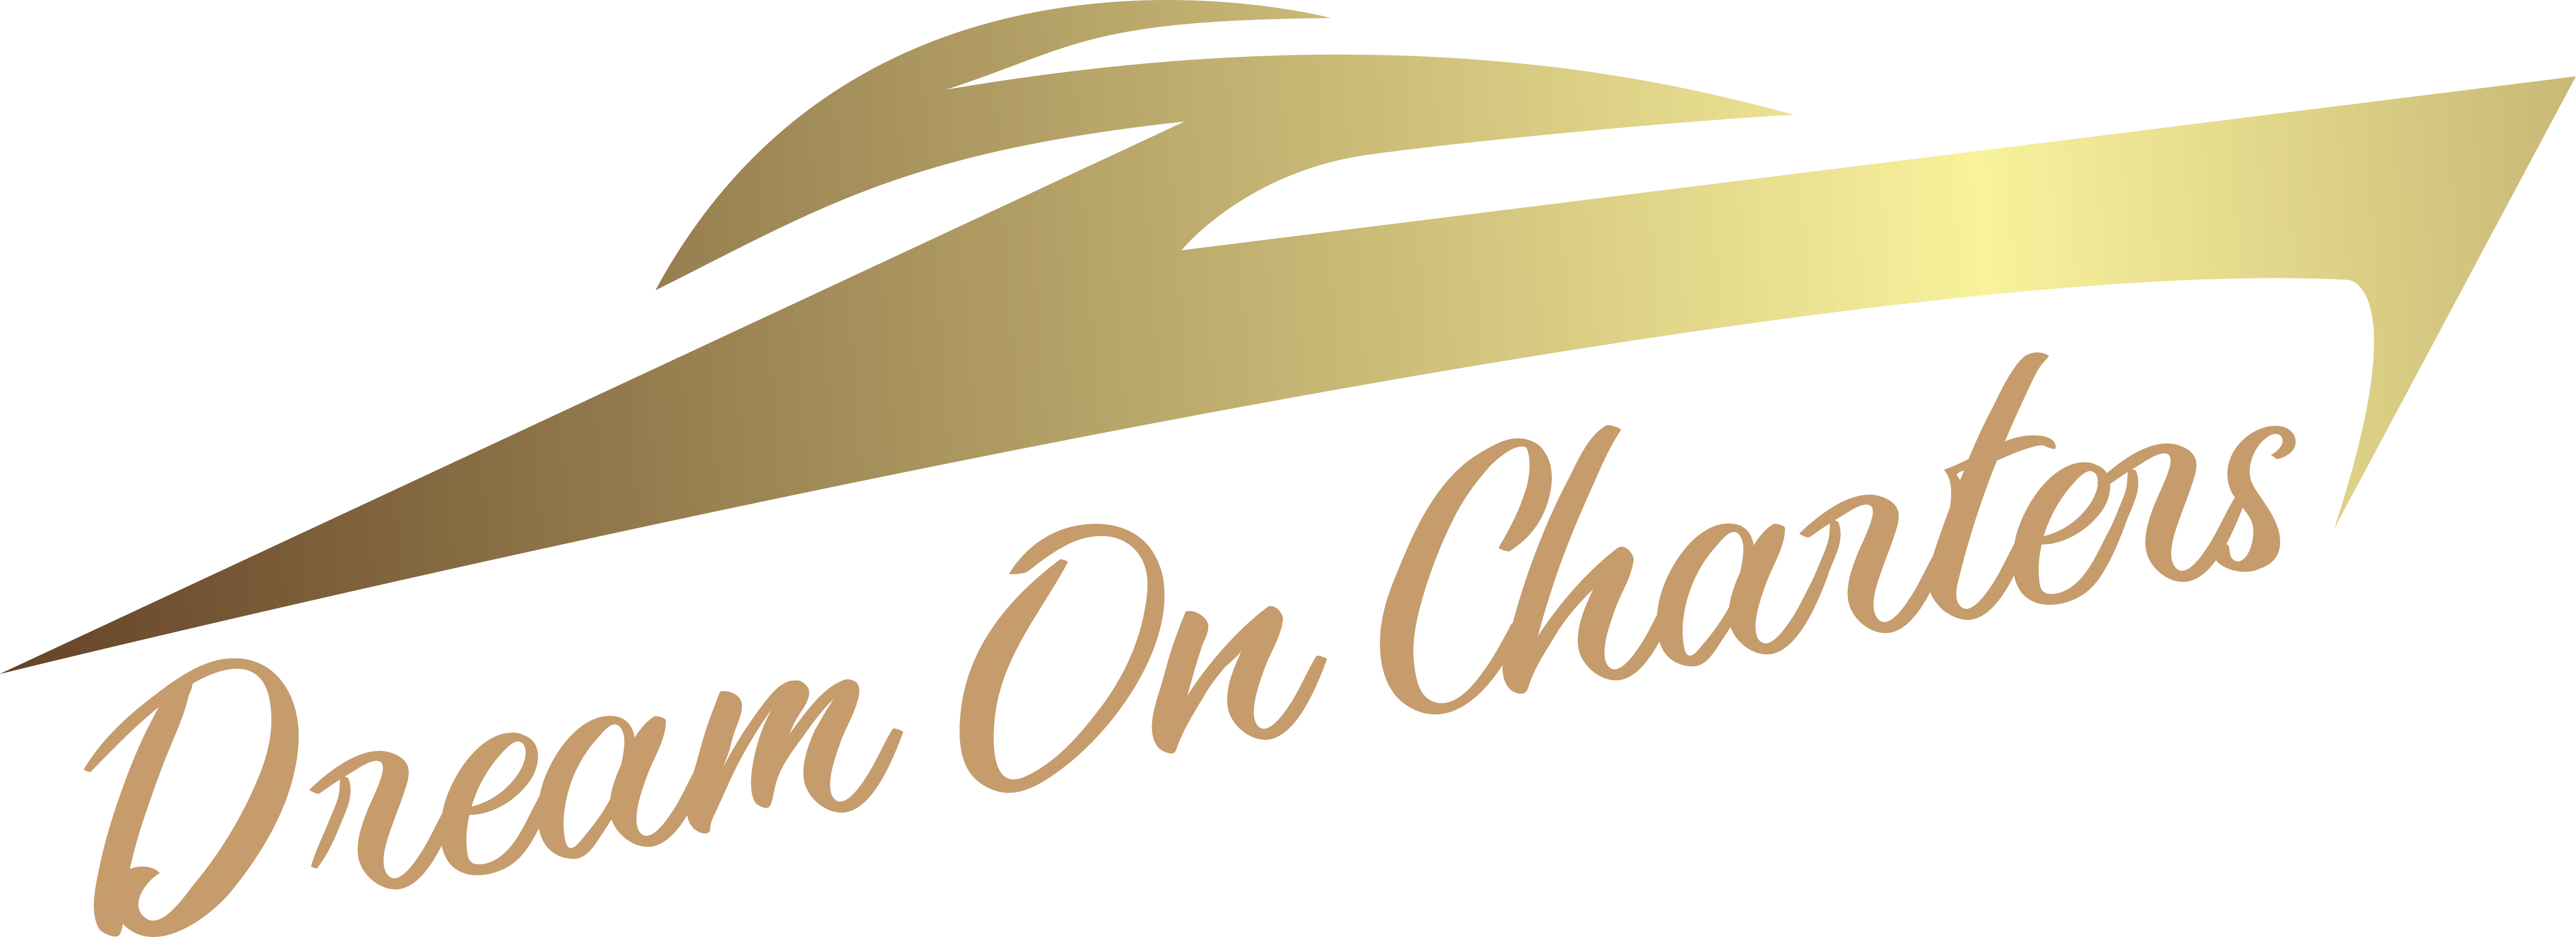 Dream On Charters